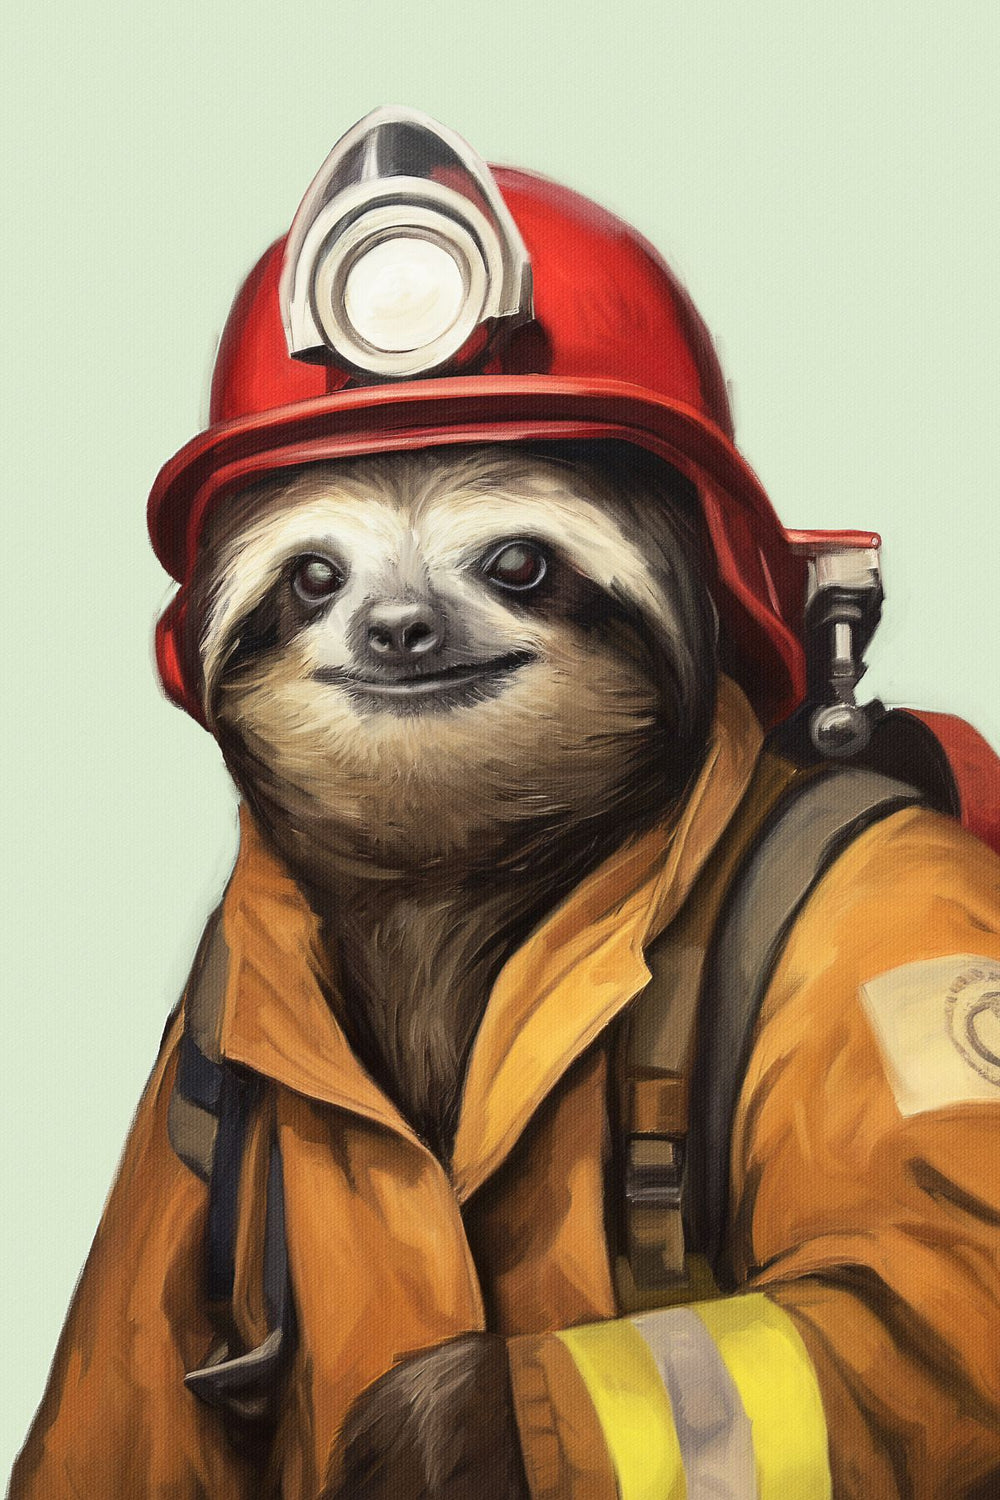 Firefighter Sloth